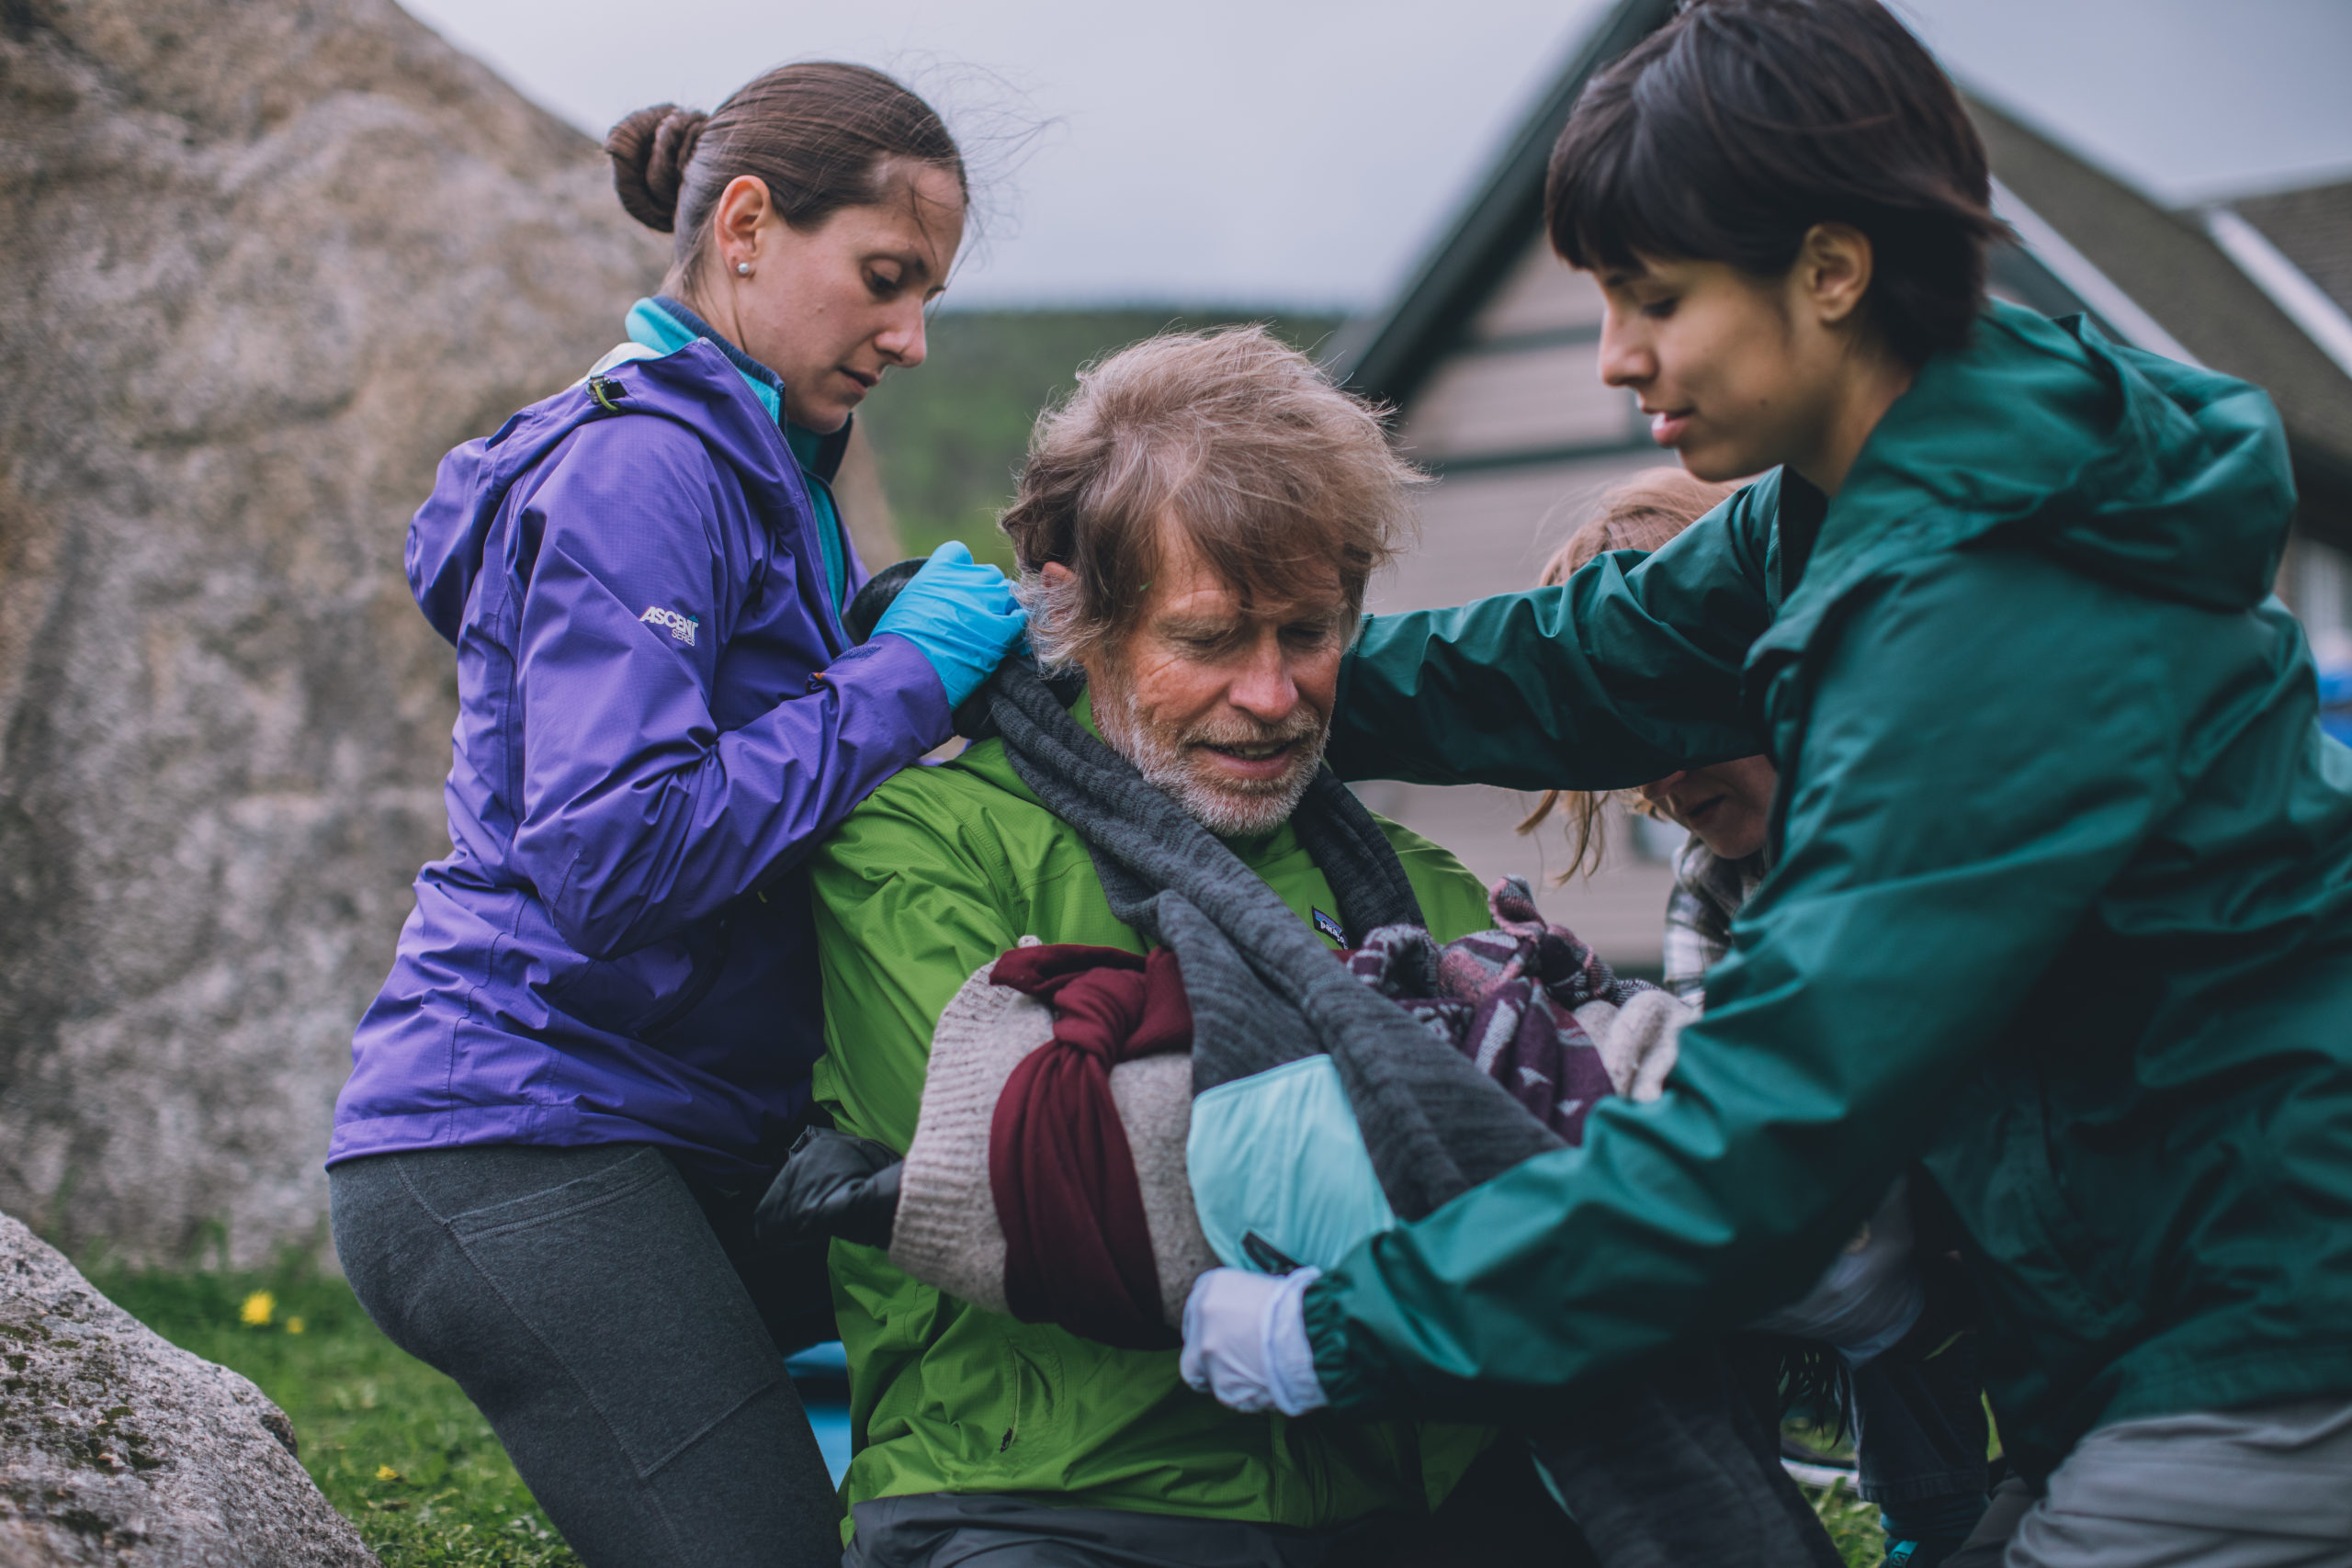 June 11, 2019. AMC Highland Center, Crawford Notch, White Mountain National Forest, New Hampshire-- A Wilderness First Aid program. Photo by Paula Champagne.